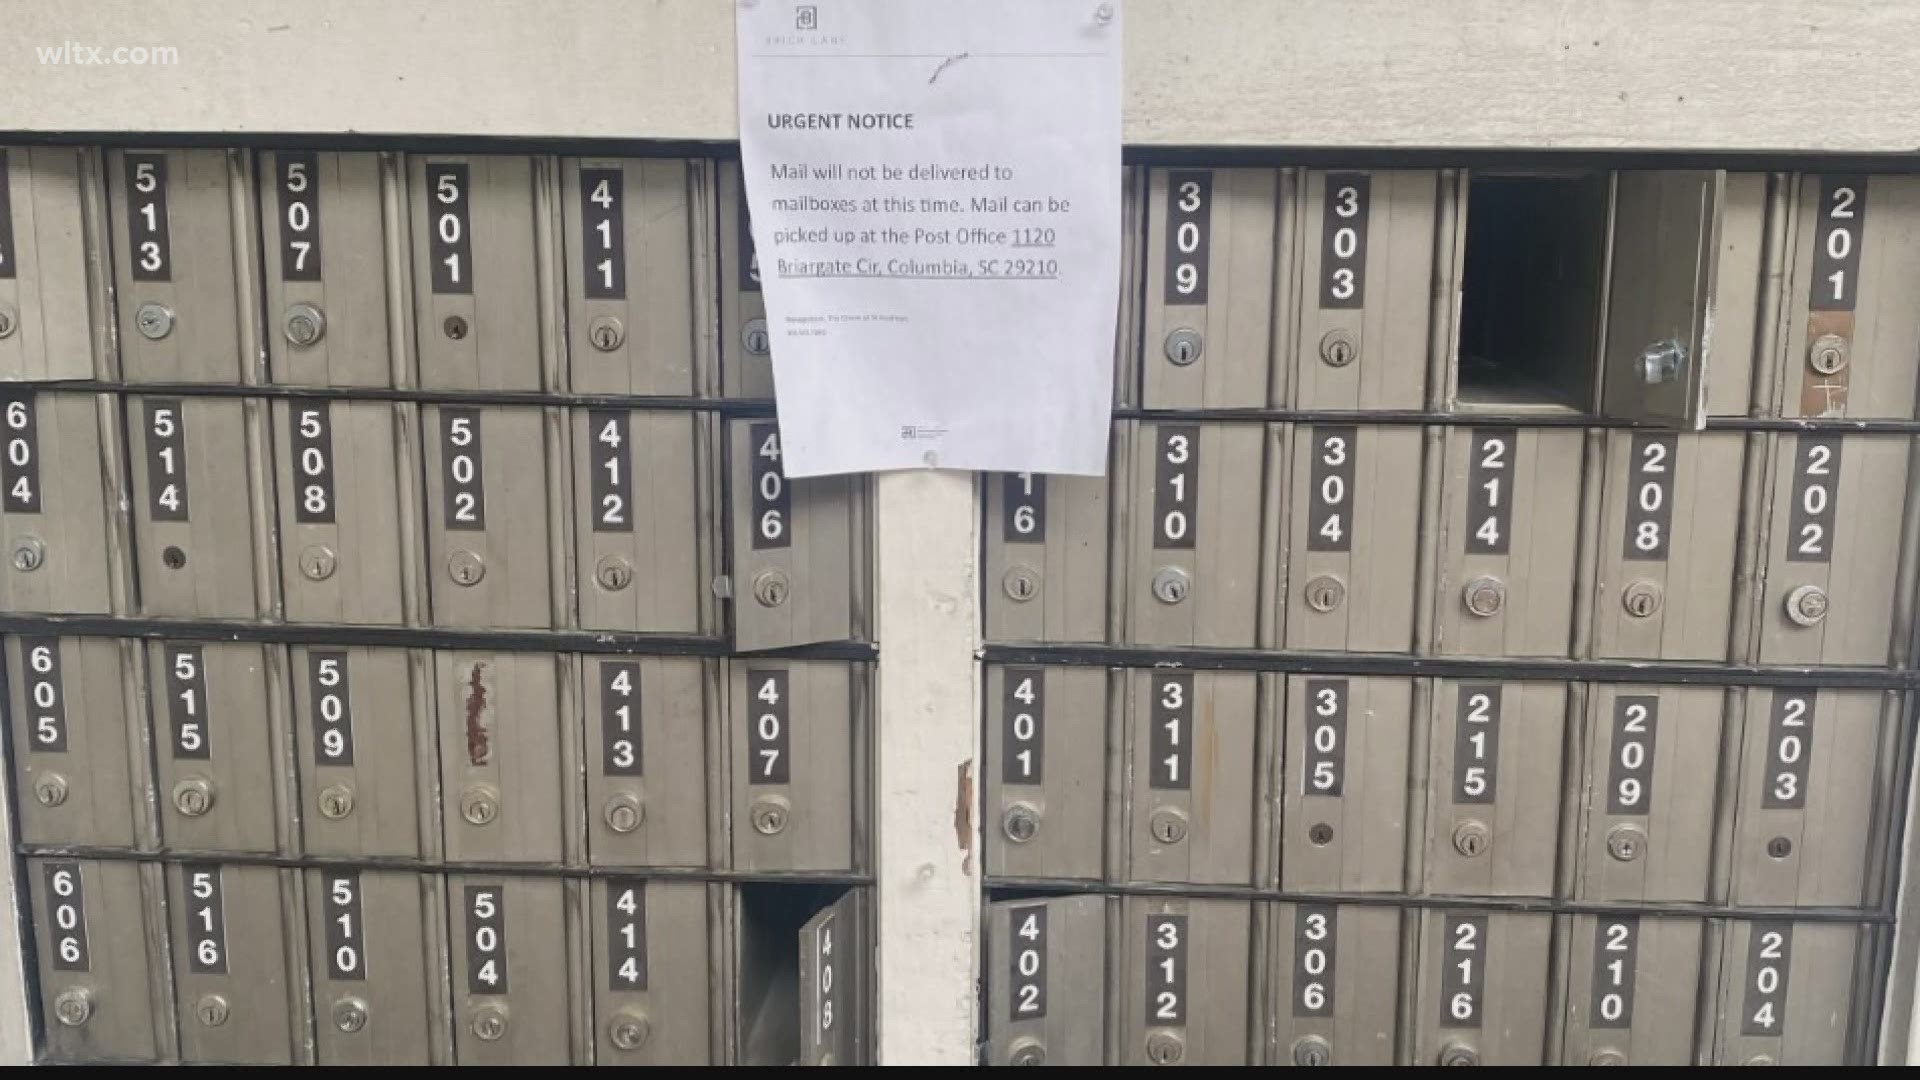 A cluster of mailboxes at The Grove at St. Andrews apartments has been out of service for a month, forcing residents to travel to a nearby Post Office to get mail.